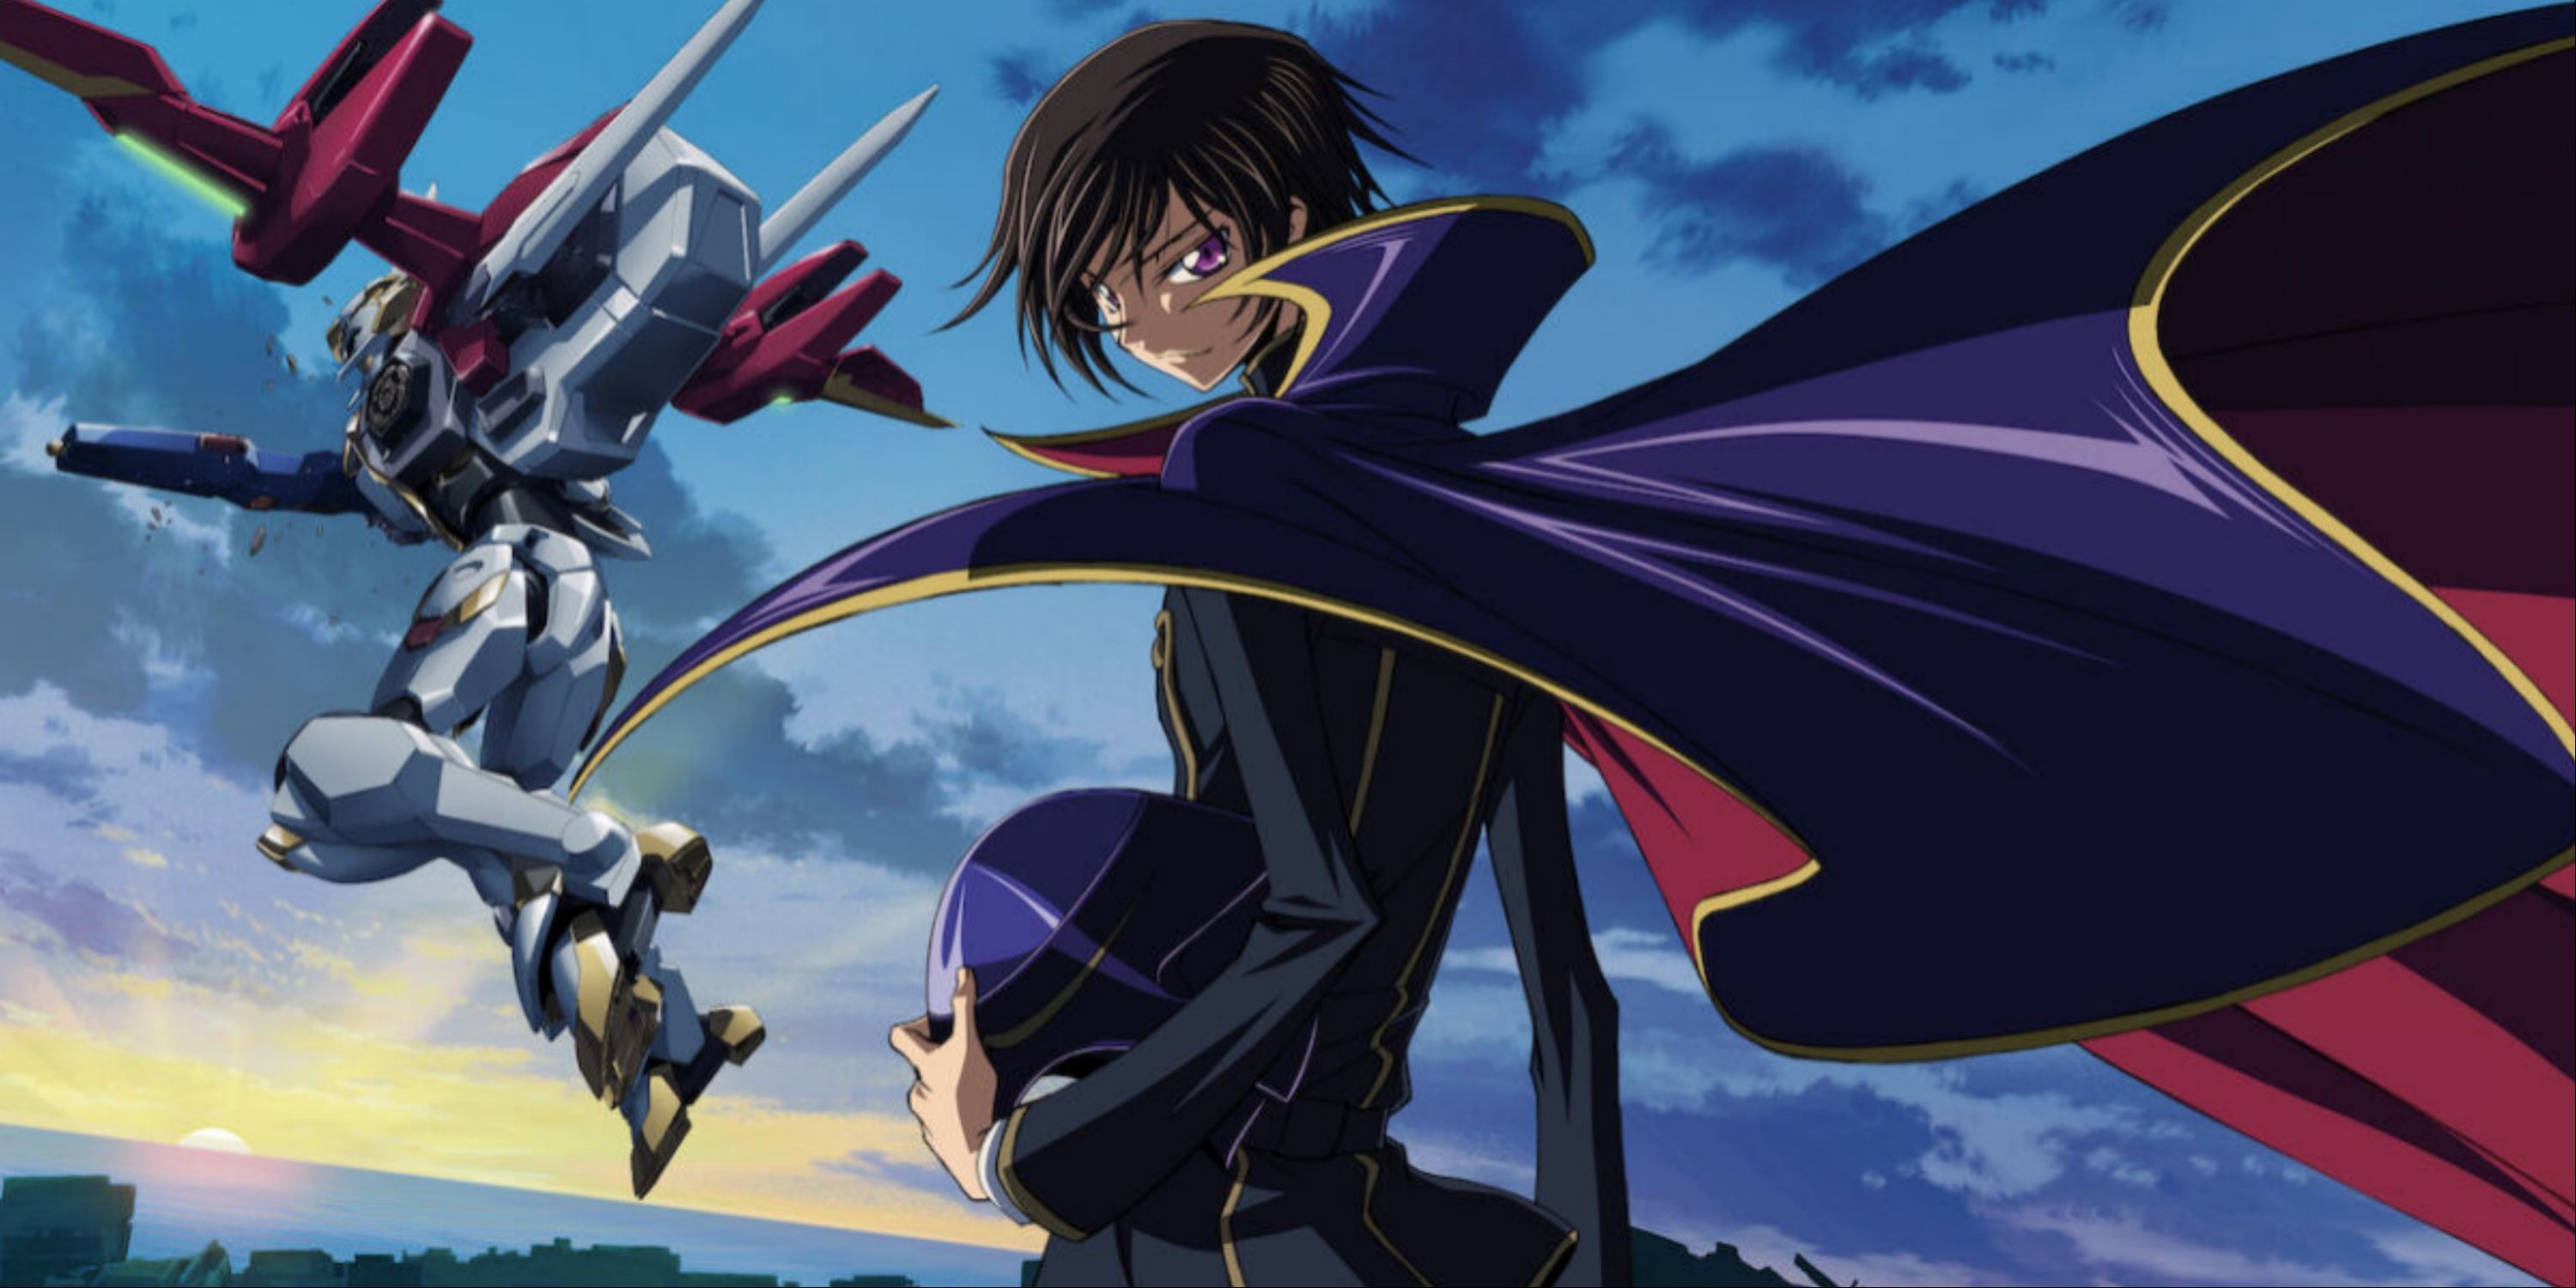 After more than 15 years Code Geass finally bowed